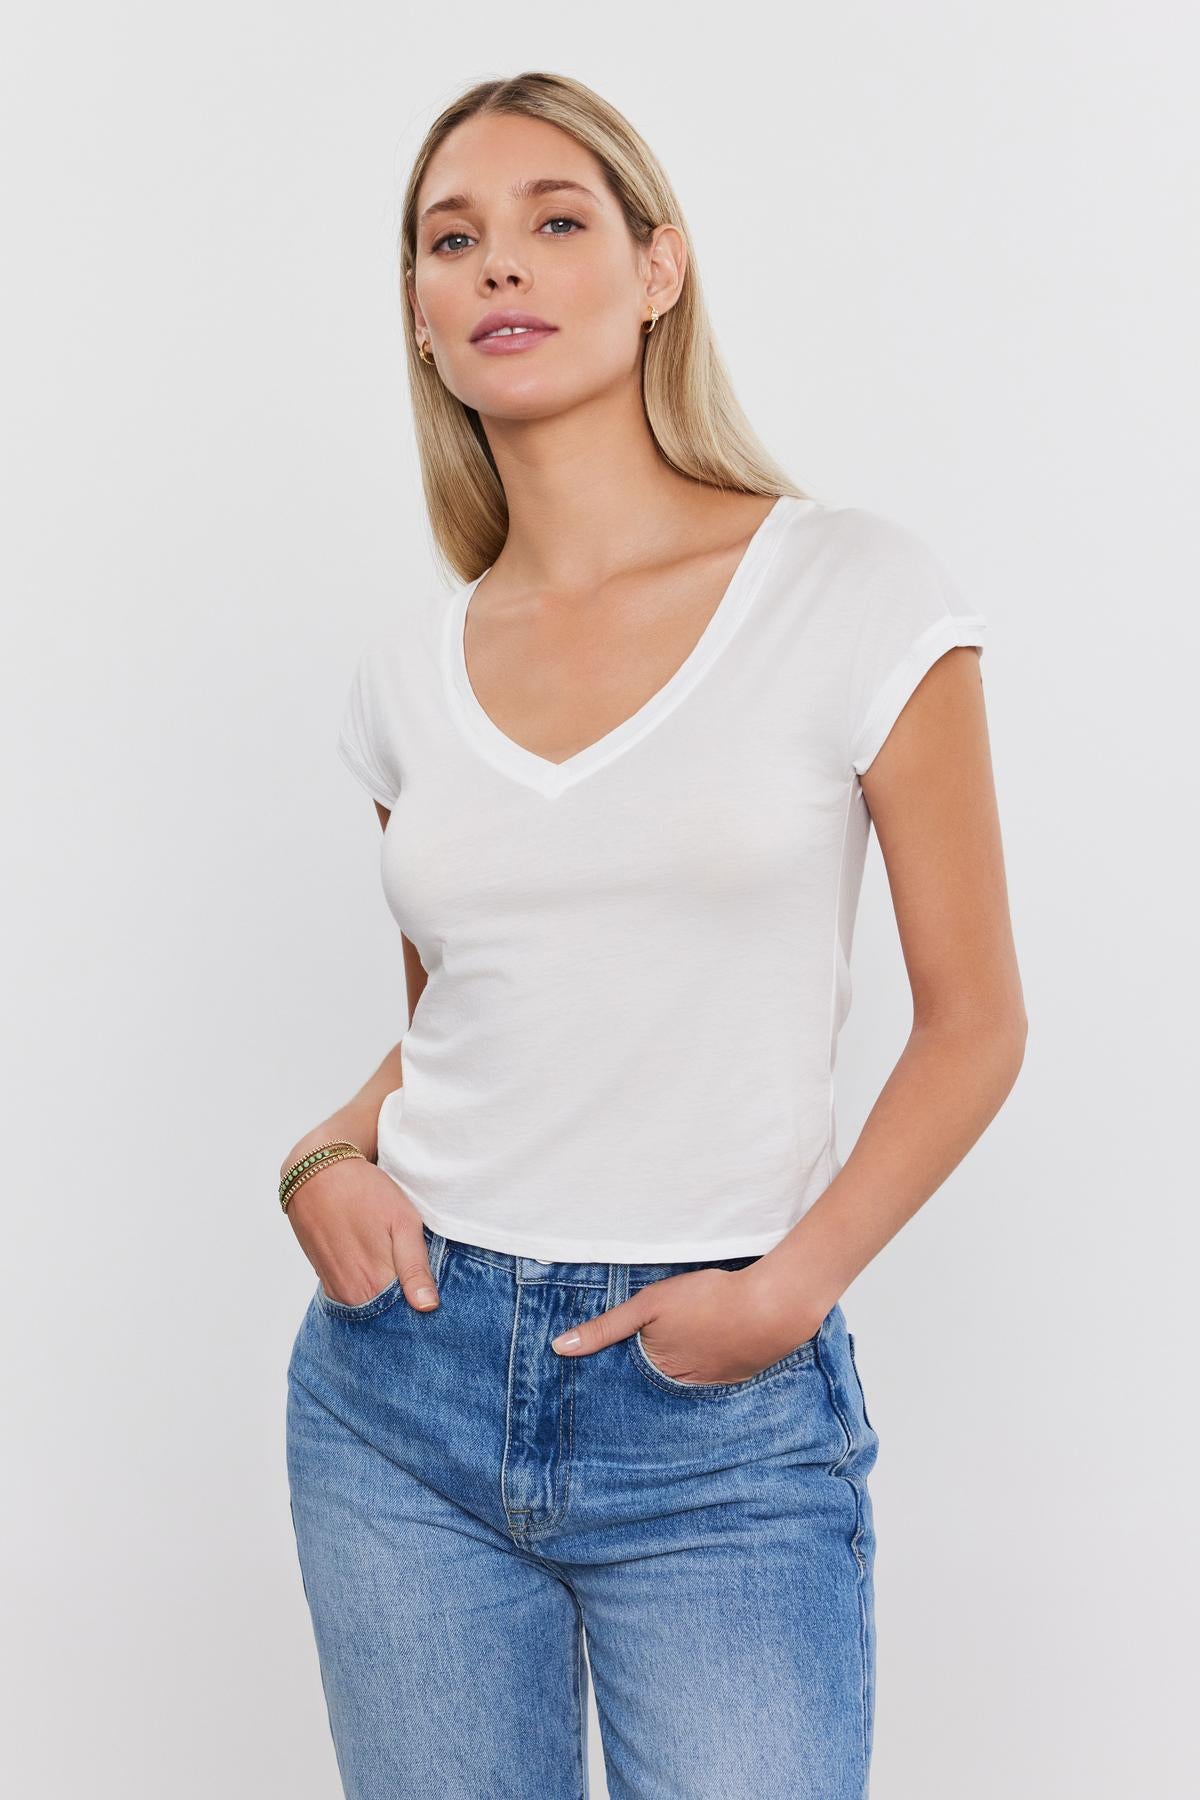 A woman wearing a white Velvet by Graham & Spencer TOBY TEE and blue jeans against a plain white background. she is posing with one hand in her pocket and looking at the camera.-36752997384385